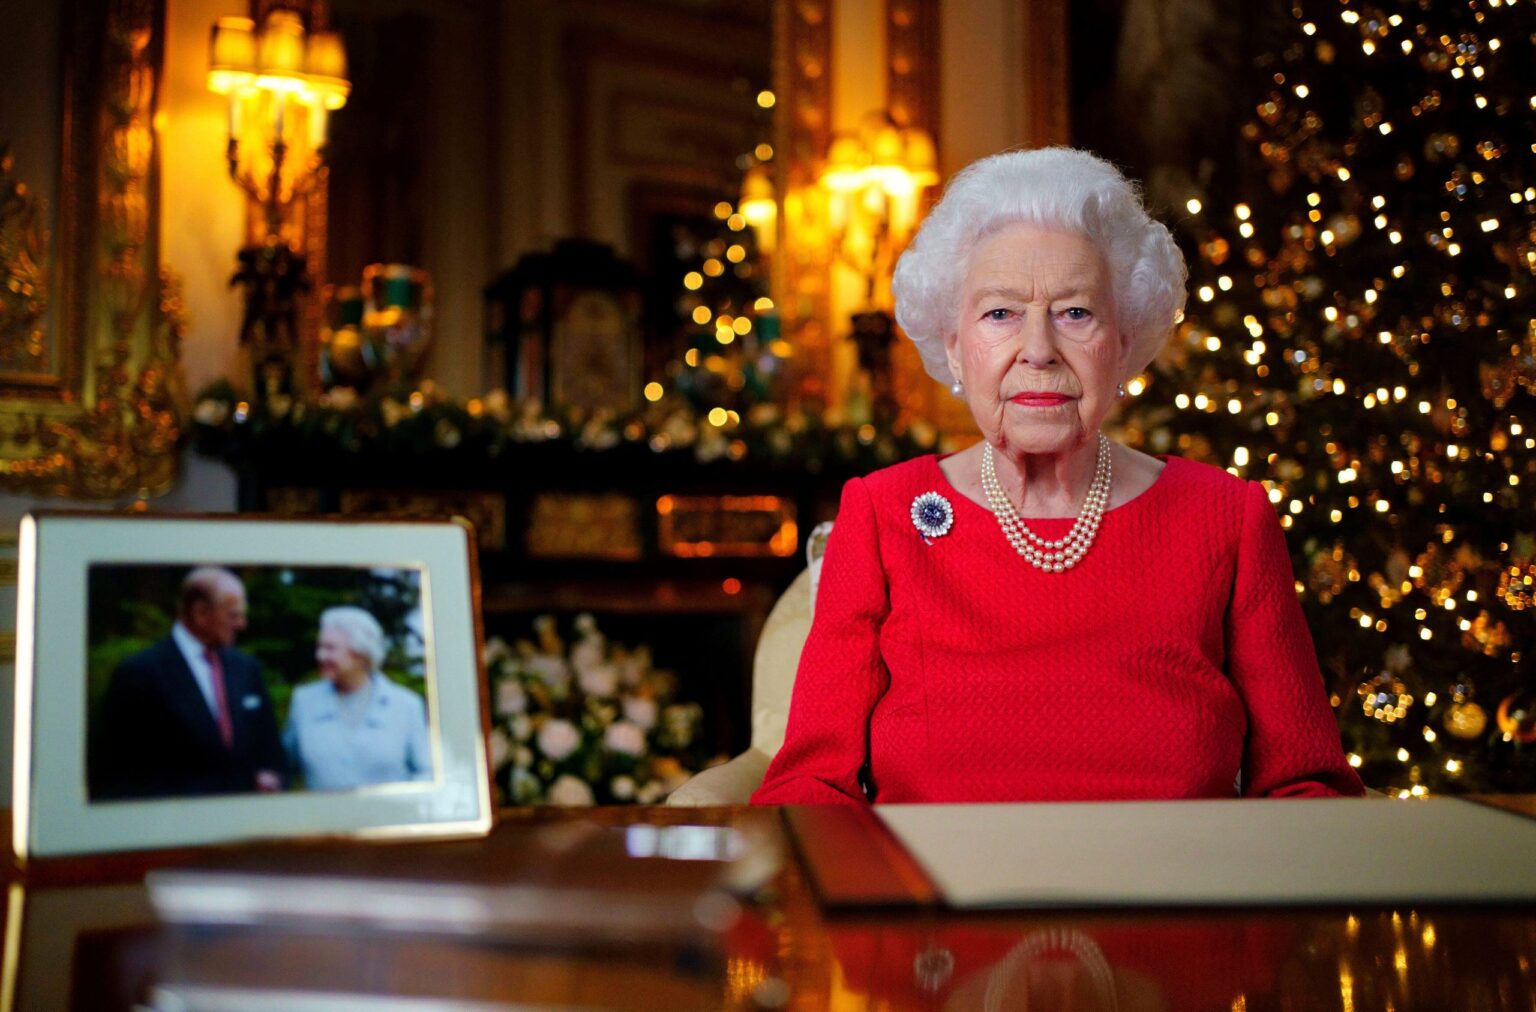 The longest Queen Elizabeth II speaks to her subjects during her annual Christmas broadcast from Windsor Castle on Dec. 25, 2021